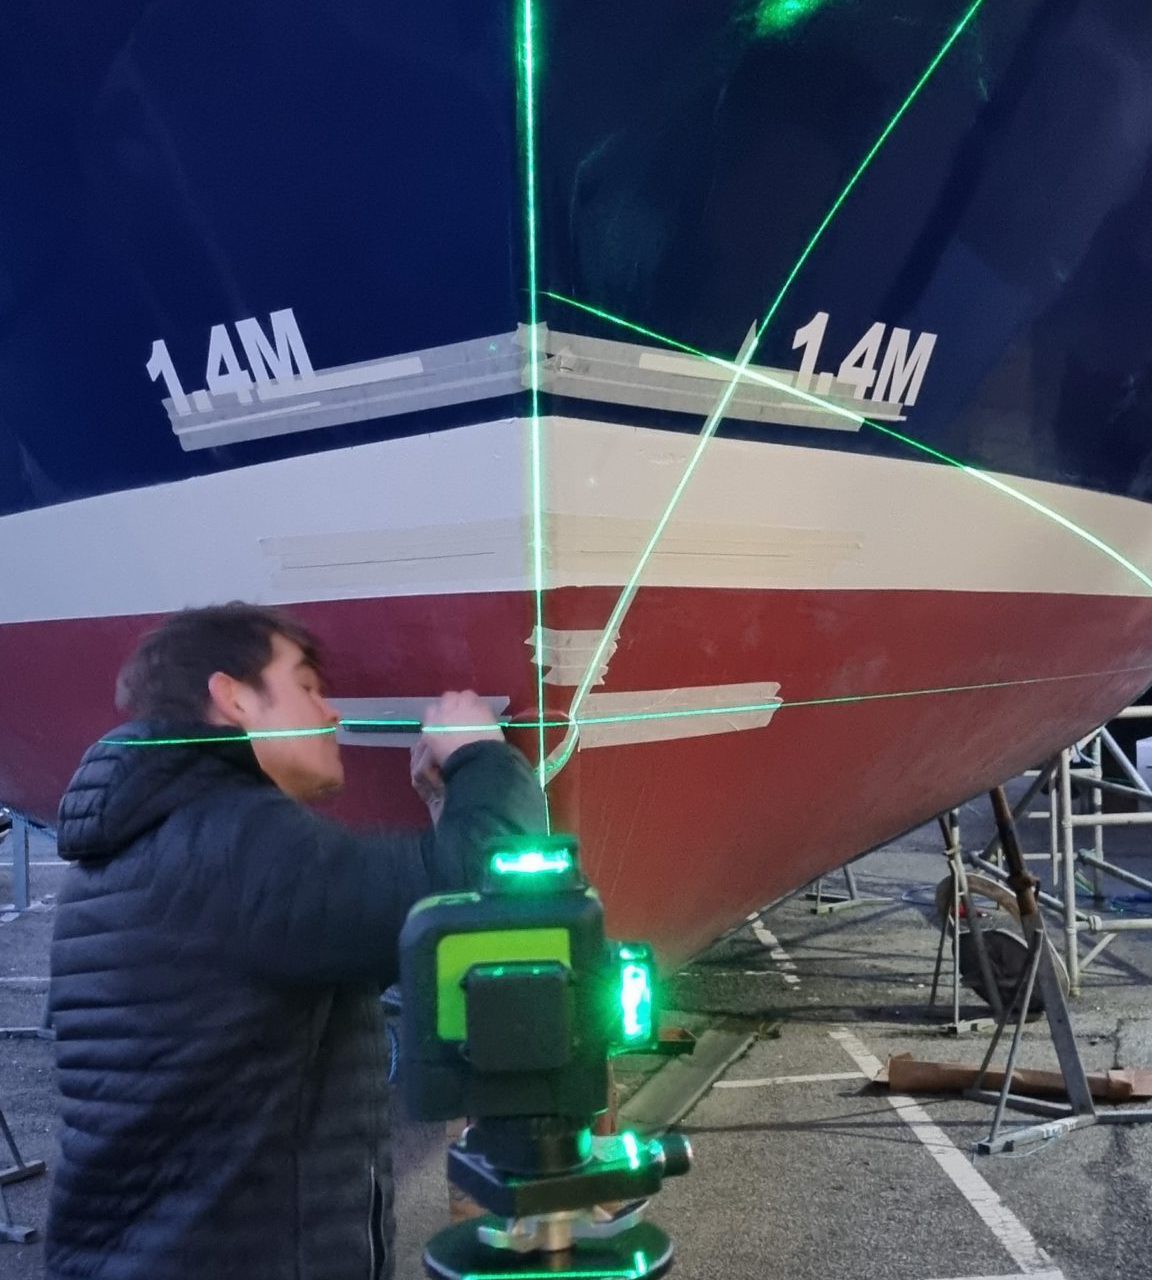 Laser level used to layout vessel draught marks